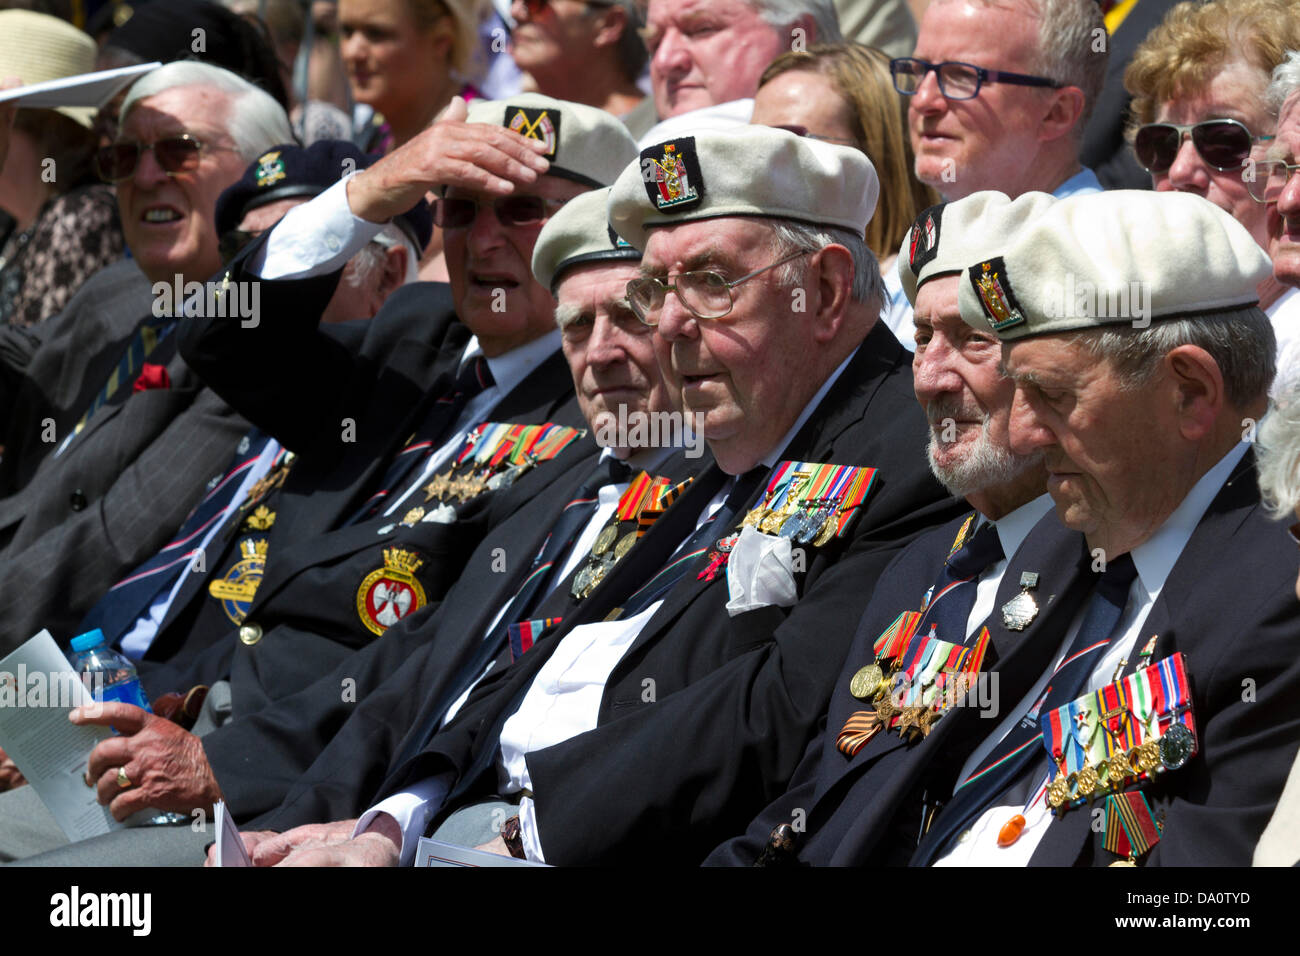 London UK. 30th June 2013. The London borough of Southwark marks Armed Forces Day with military parades and a ceremony of recognition to the British military service men and women Credit:  amer ghazzal/Alamy Live News Stock Photo